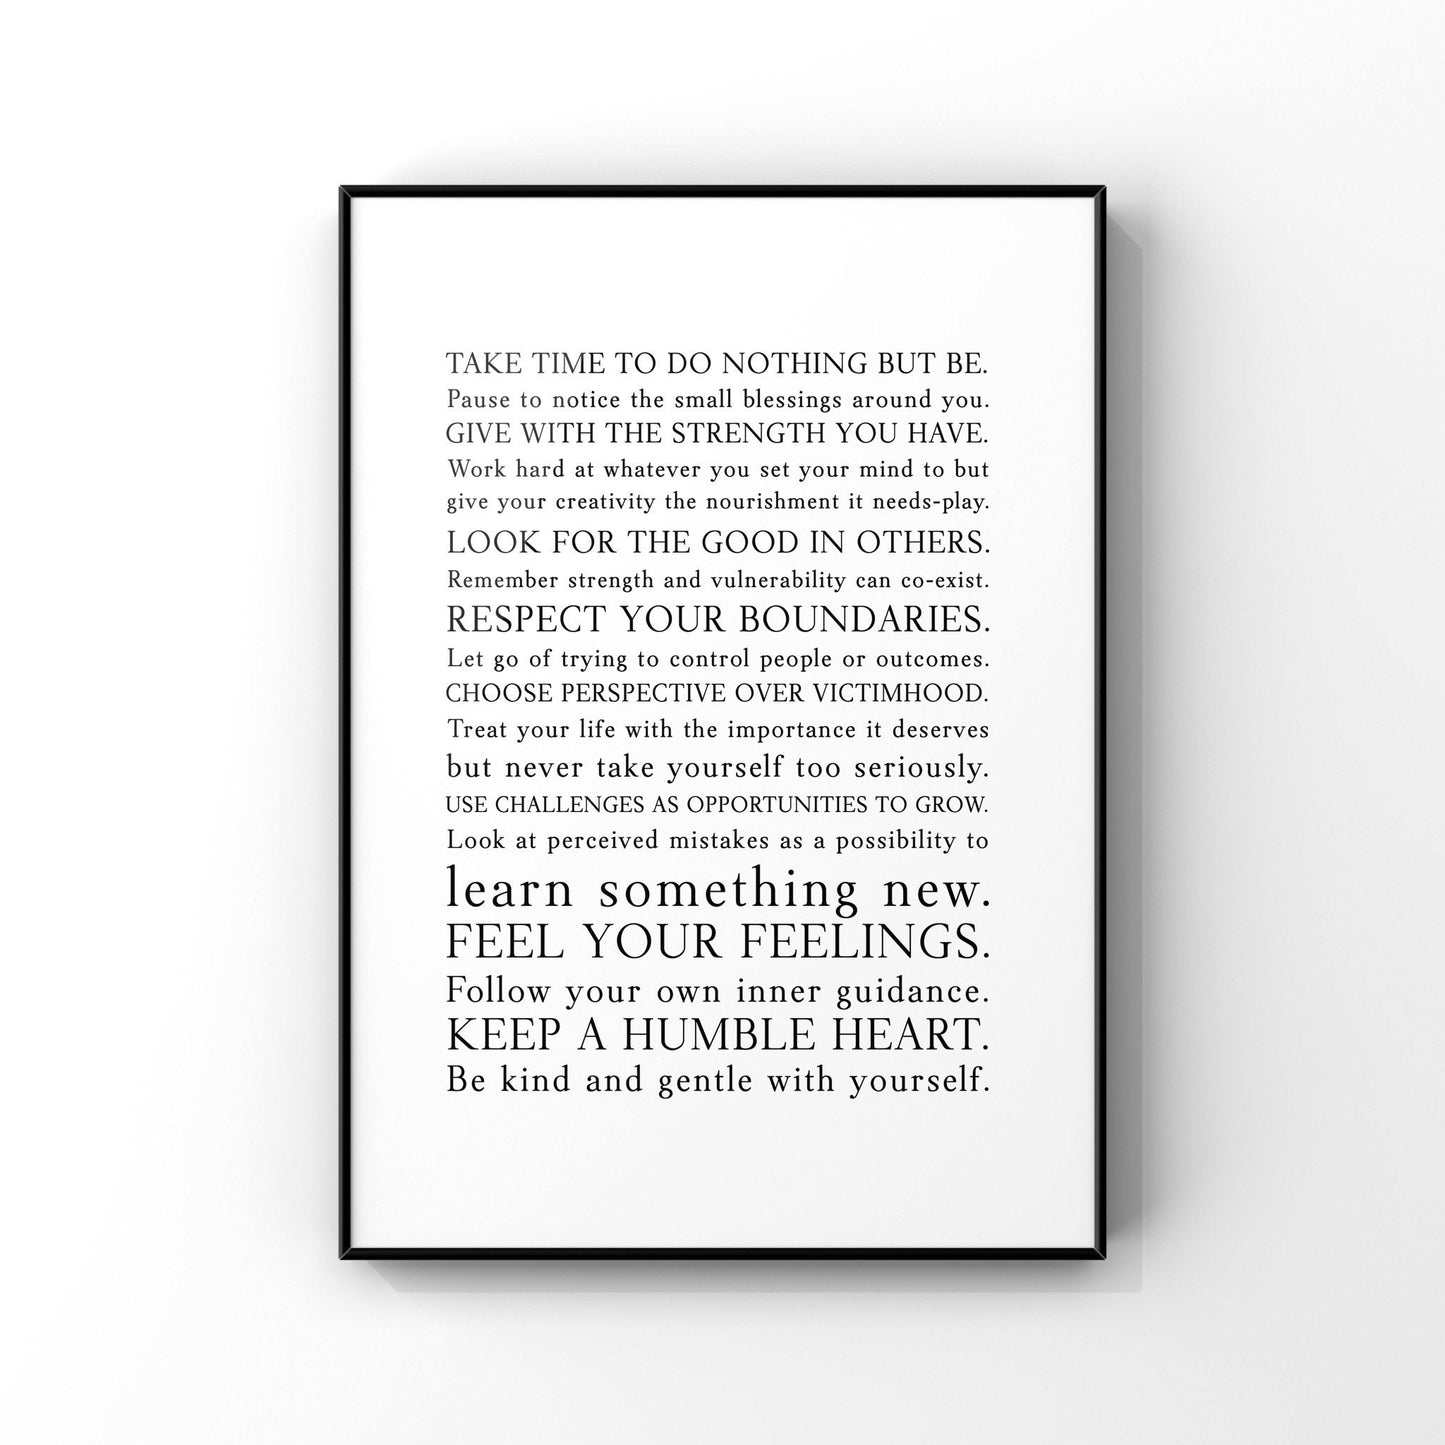 Words to live by,Manifesto art print,Graduation gift,Inspirational quote print,Motivational saying,Encouragement gift,Family manifesto